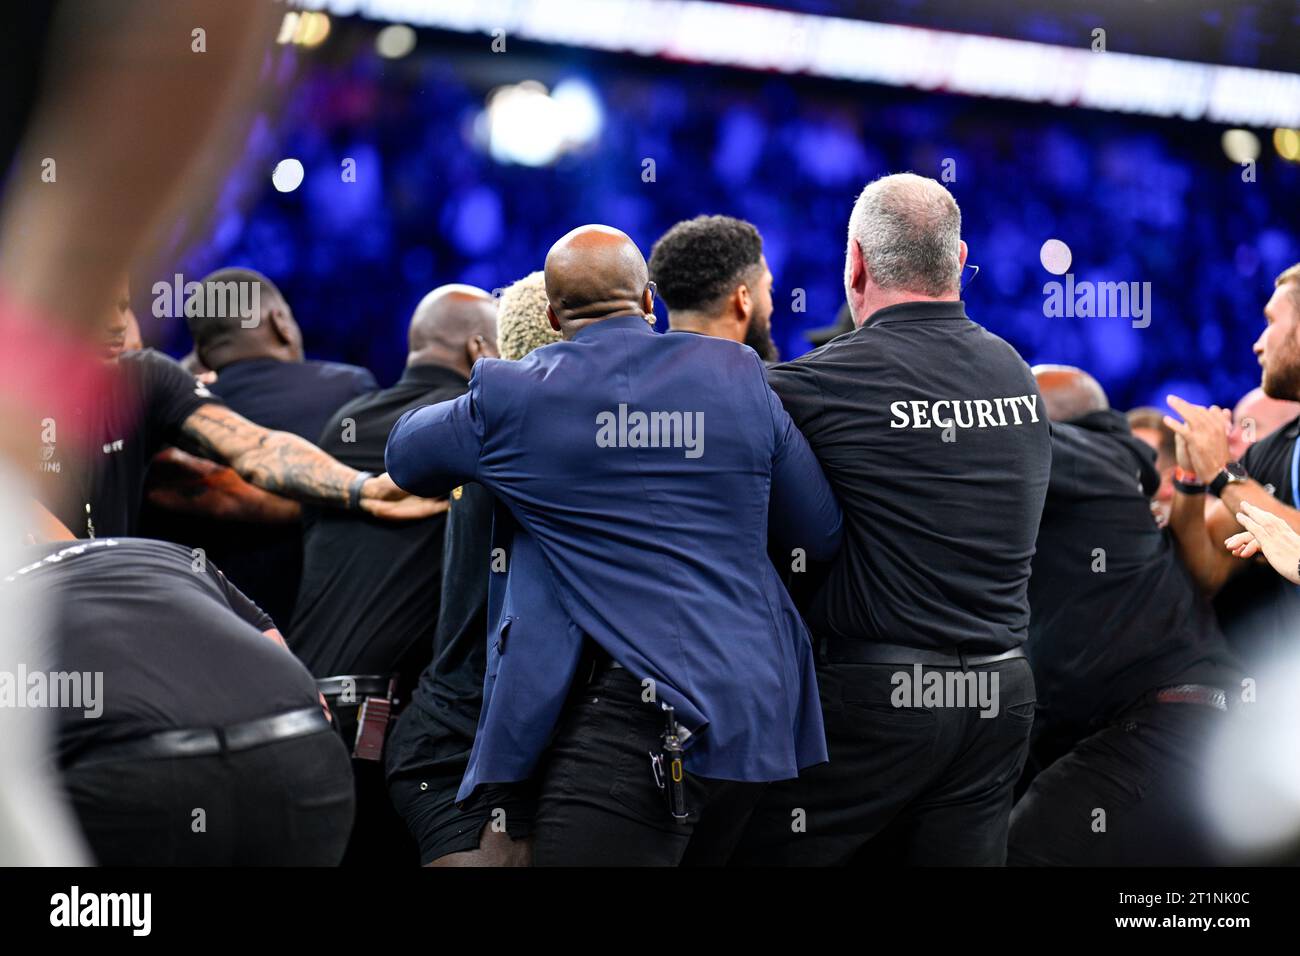 Manchester, UK. A mass brawl breaks out in the ring during Logan Paul and Dillon Danis' Prime Card boxing match at Manchester Arena. Paul won by disqualification follwing the brawl. Credit: Benjamin Wareing/ Alamy Live News Stock Photo